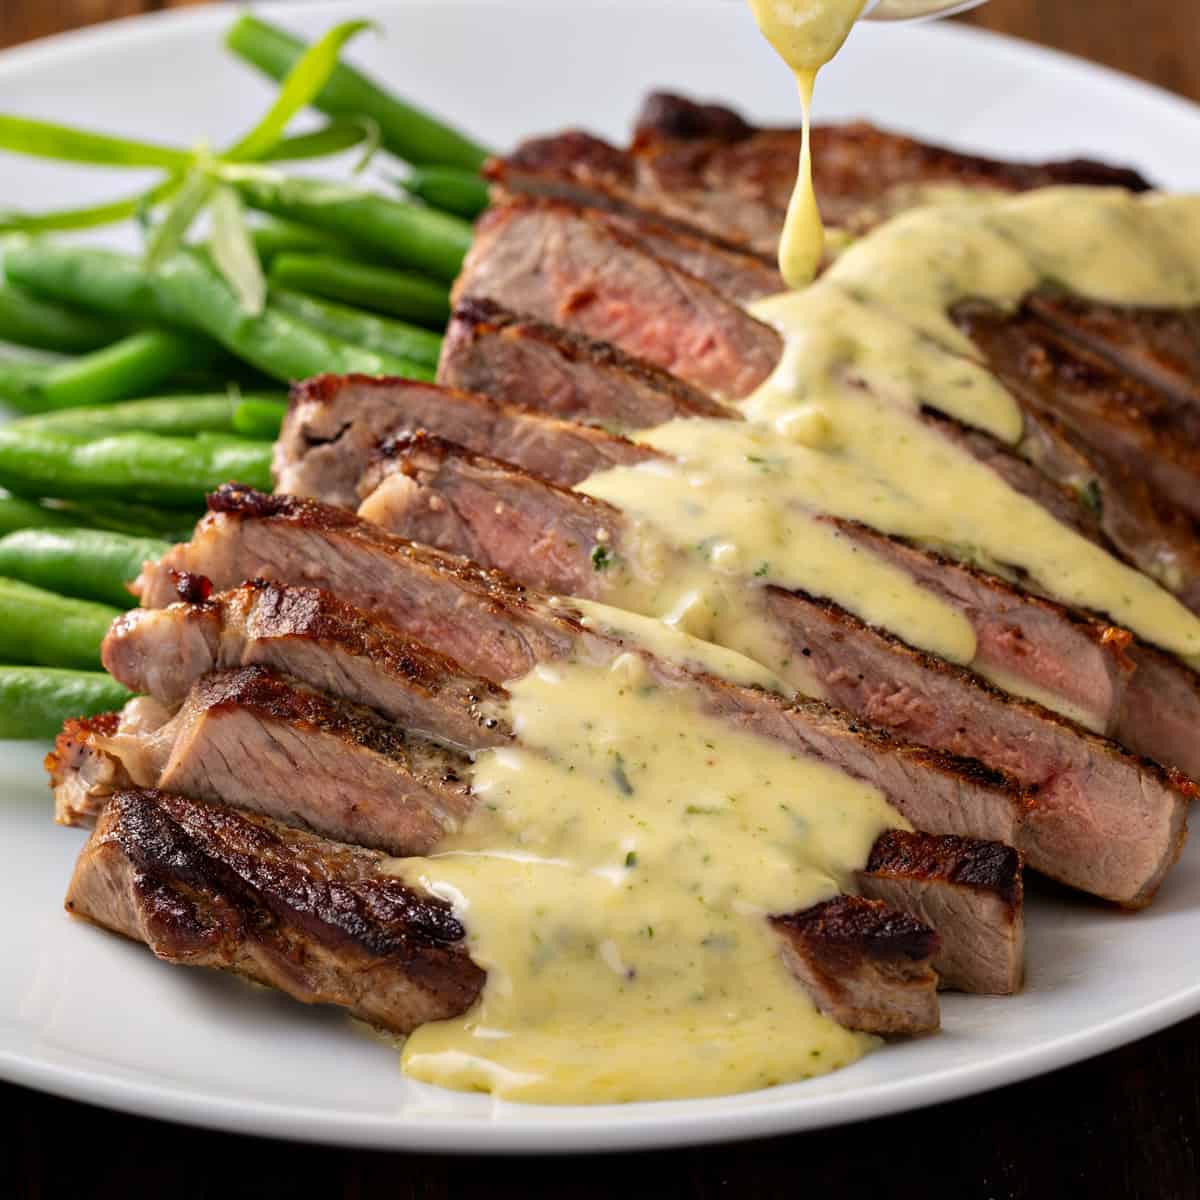 bearnaise sauce recipe French steak condiment classic traditional authentic remoulade tarragon